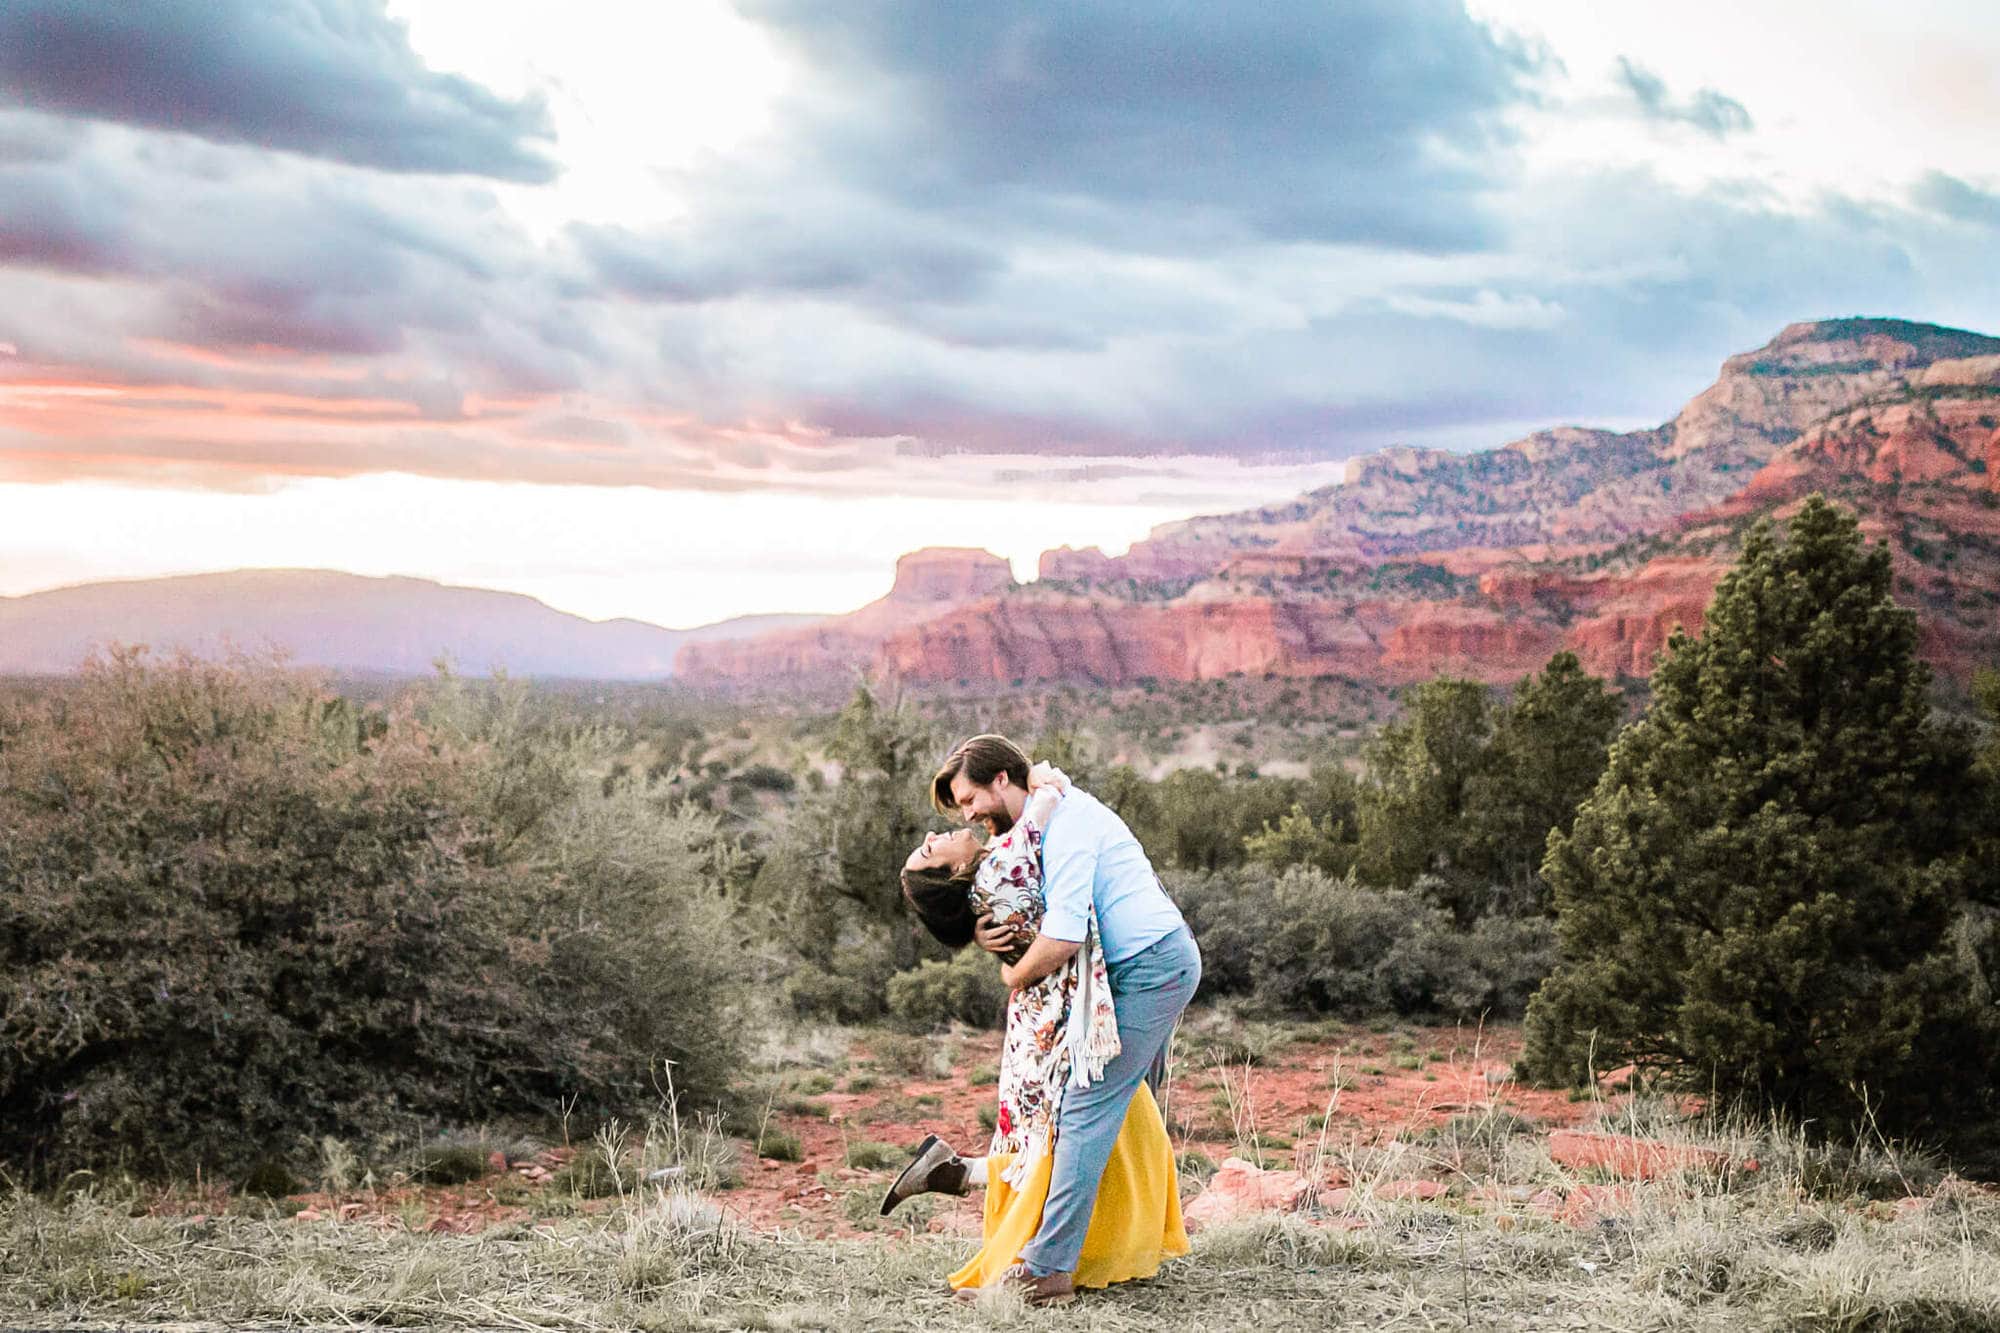 If you're planning a Sedona Elopement, then this is the guide for you. Everything you need to know about planning a small Sedona Wedding can be found here.